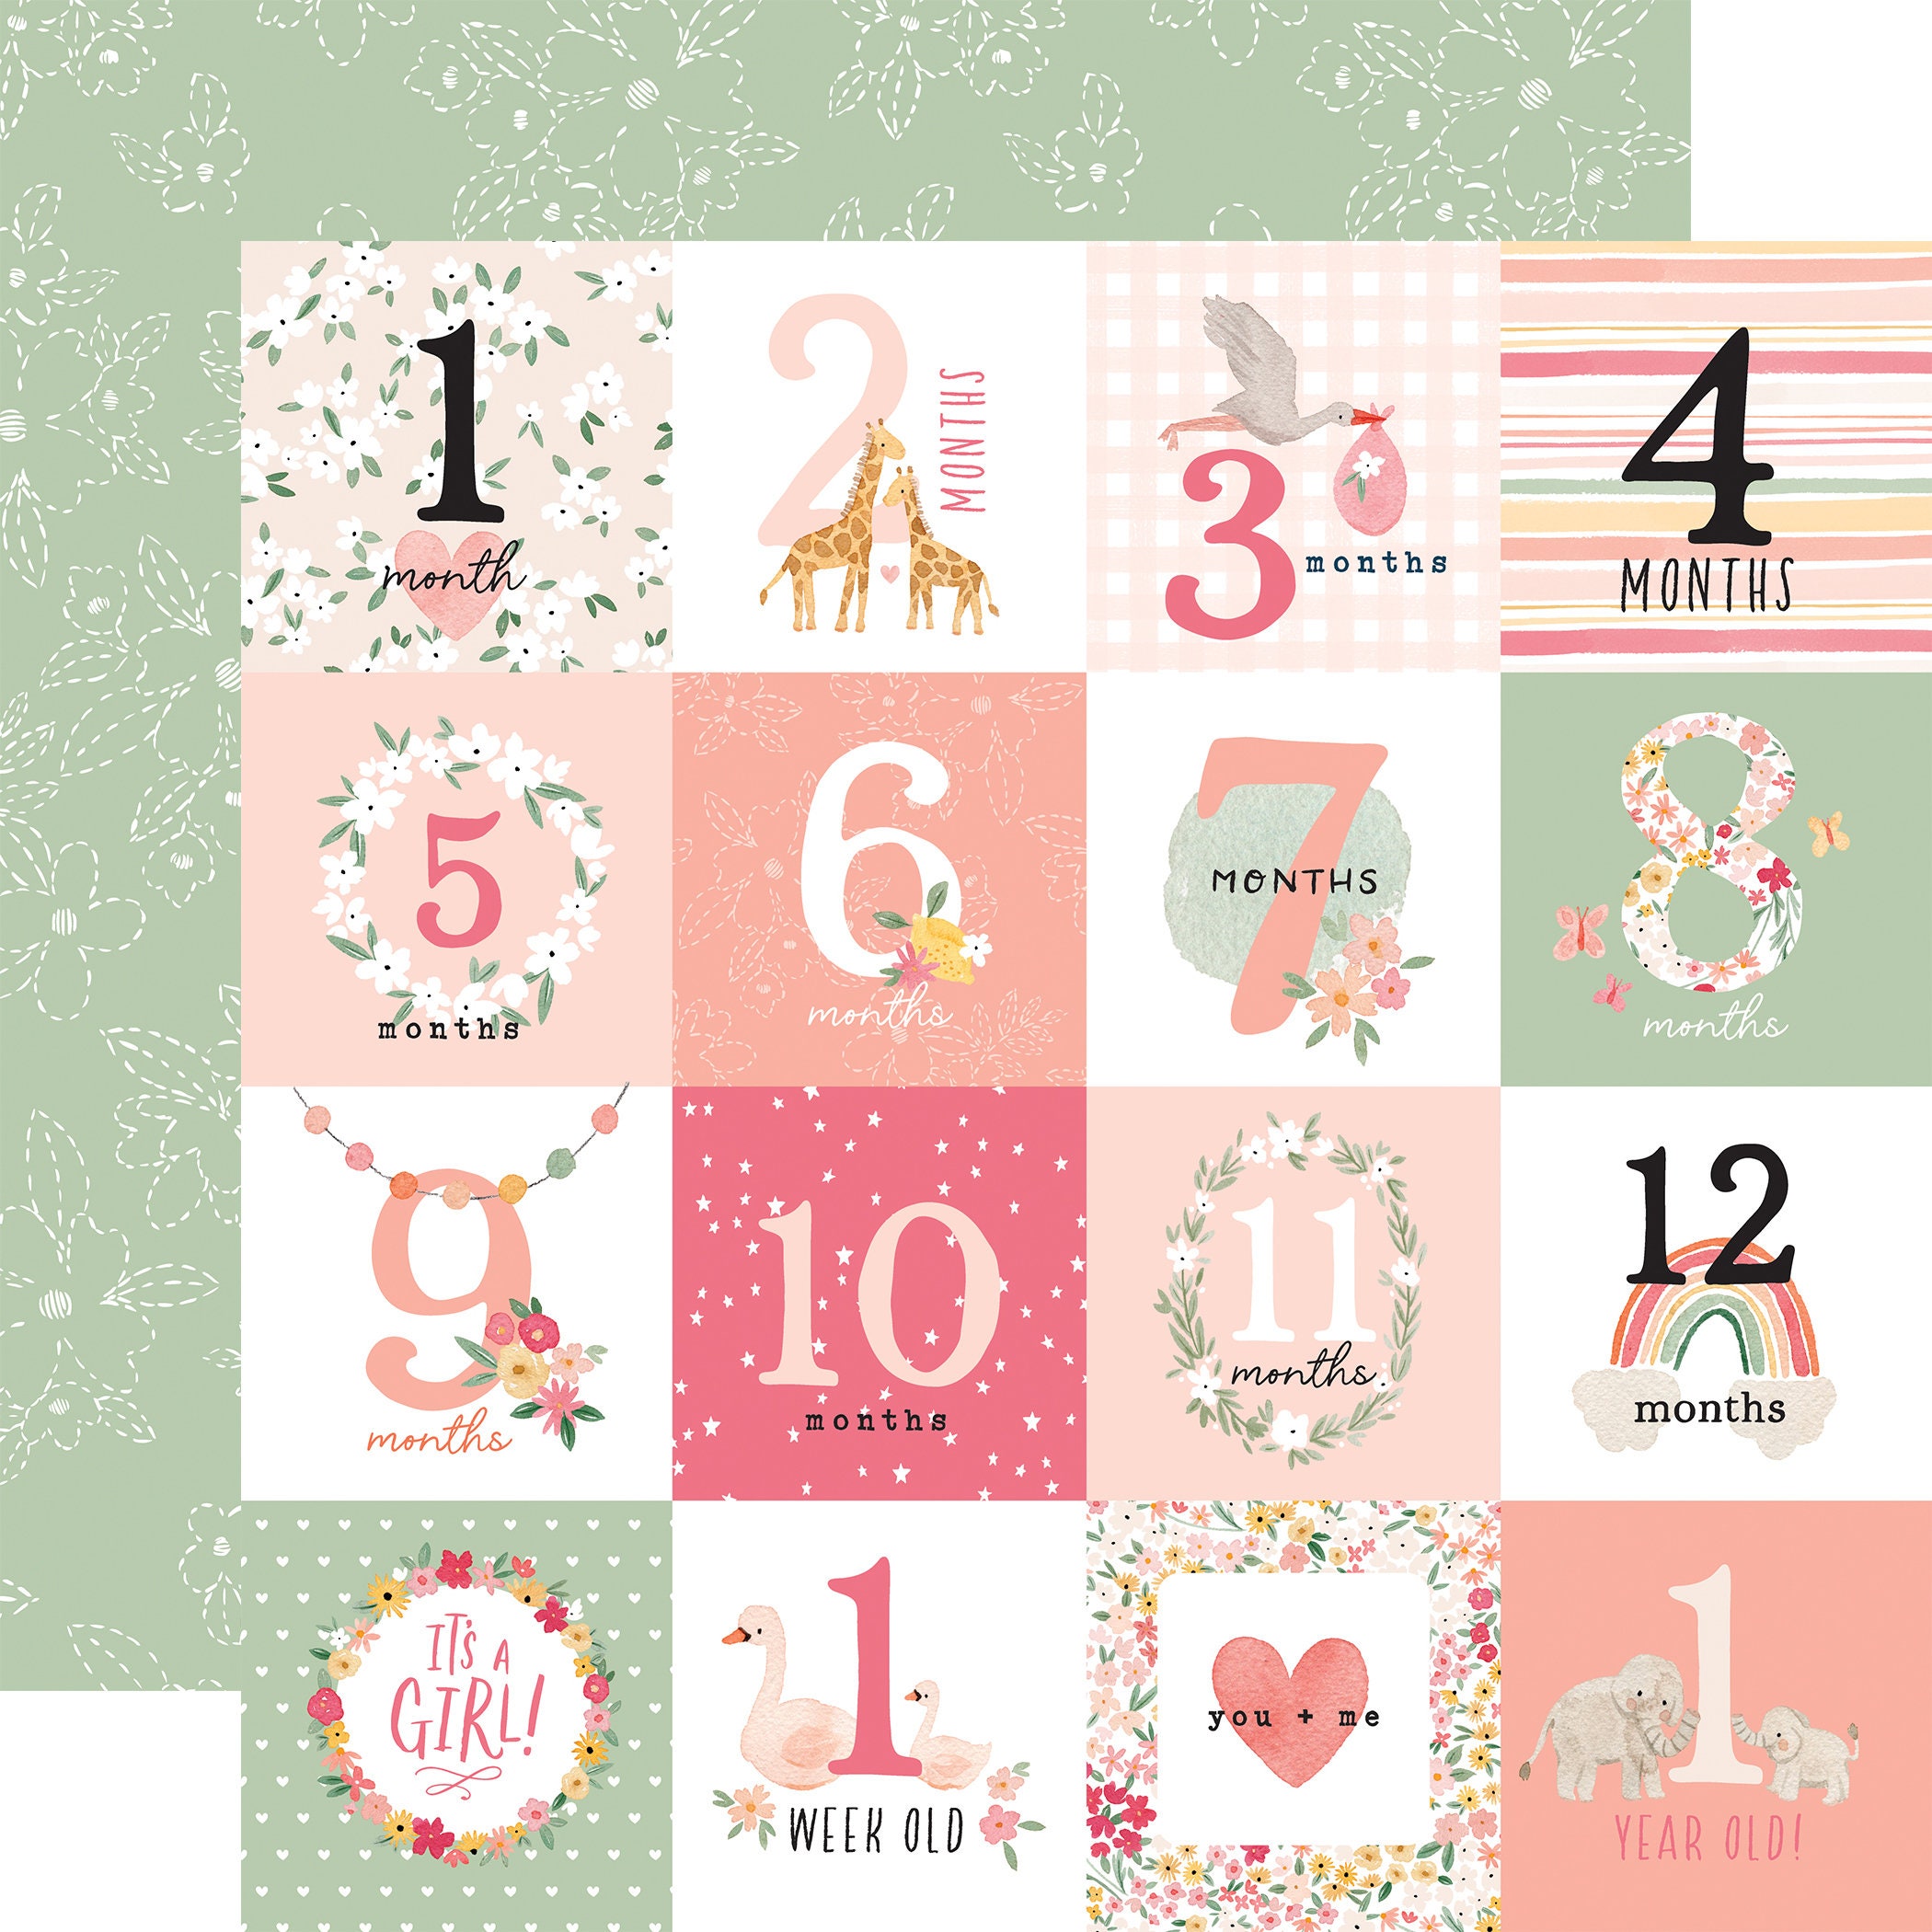 Echo Park WELCOME BABY GIRL 6X6 MEGA Paper Pad – Mindless Crafting